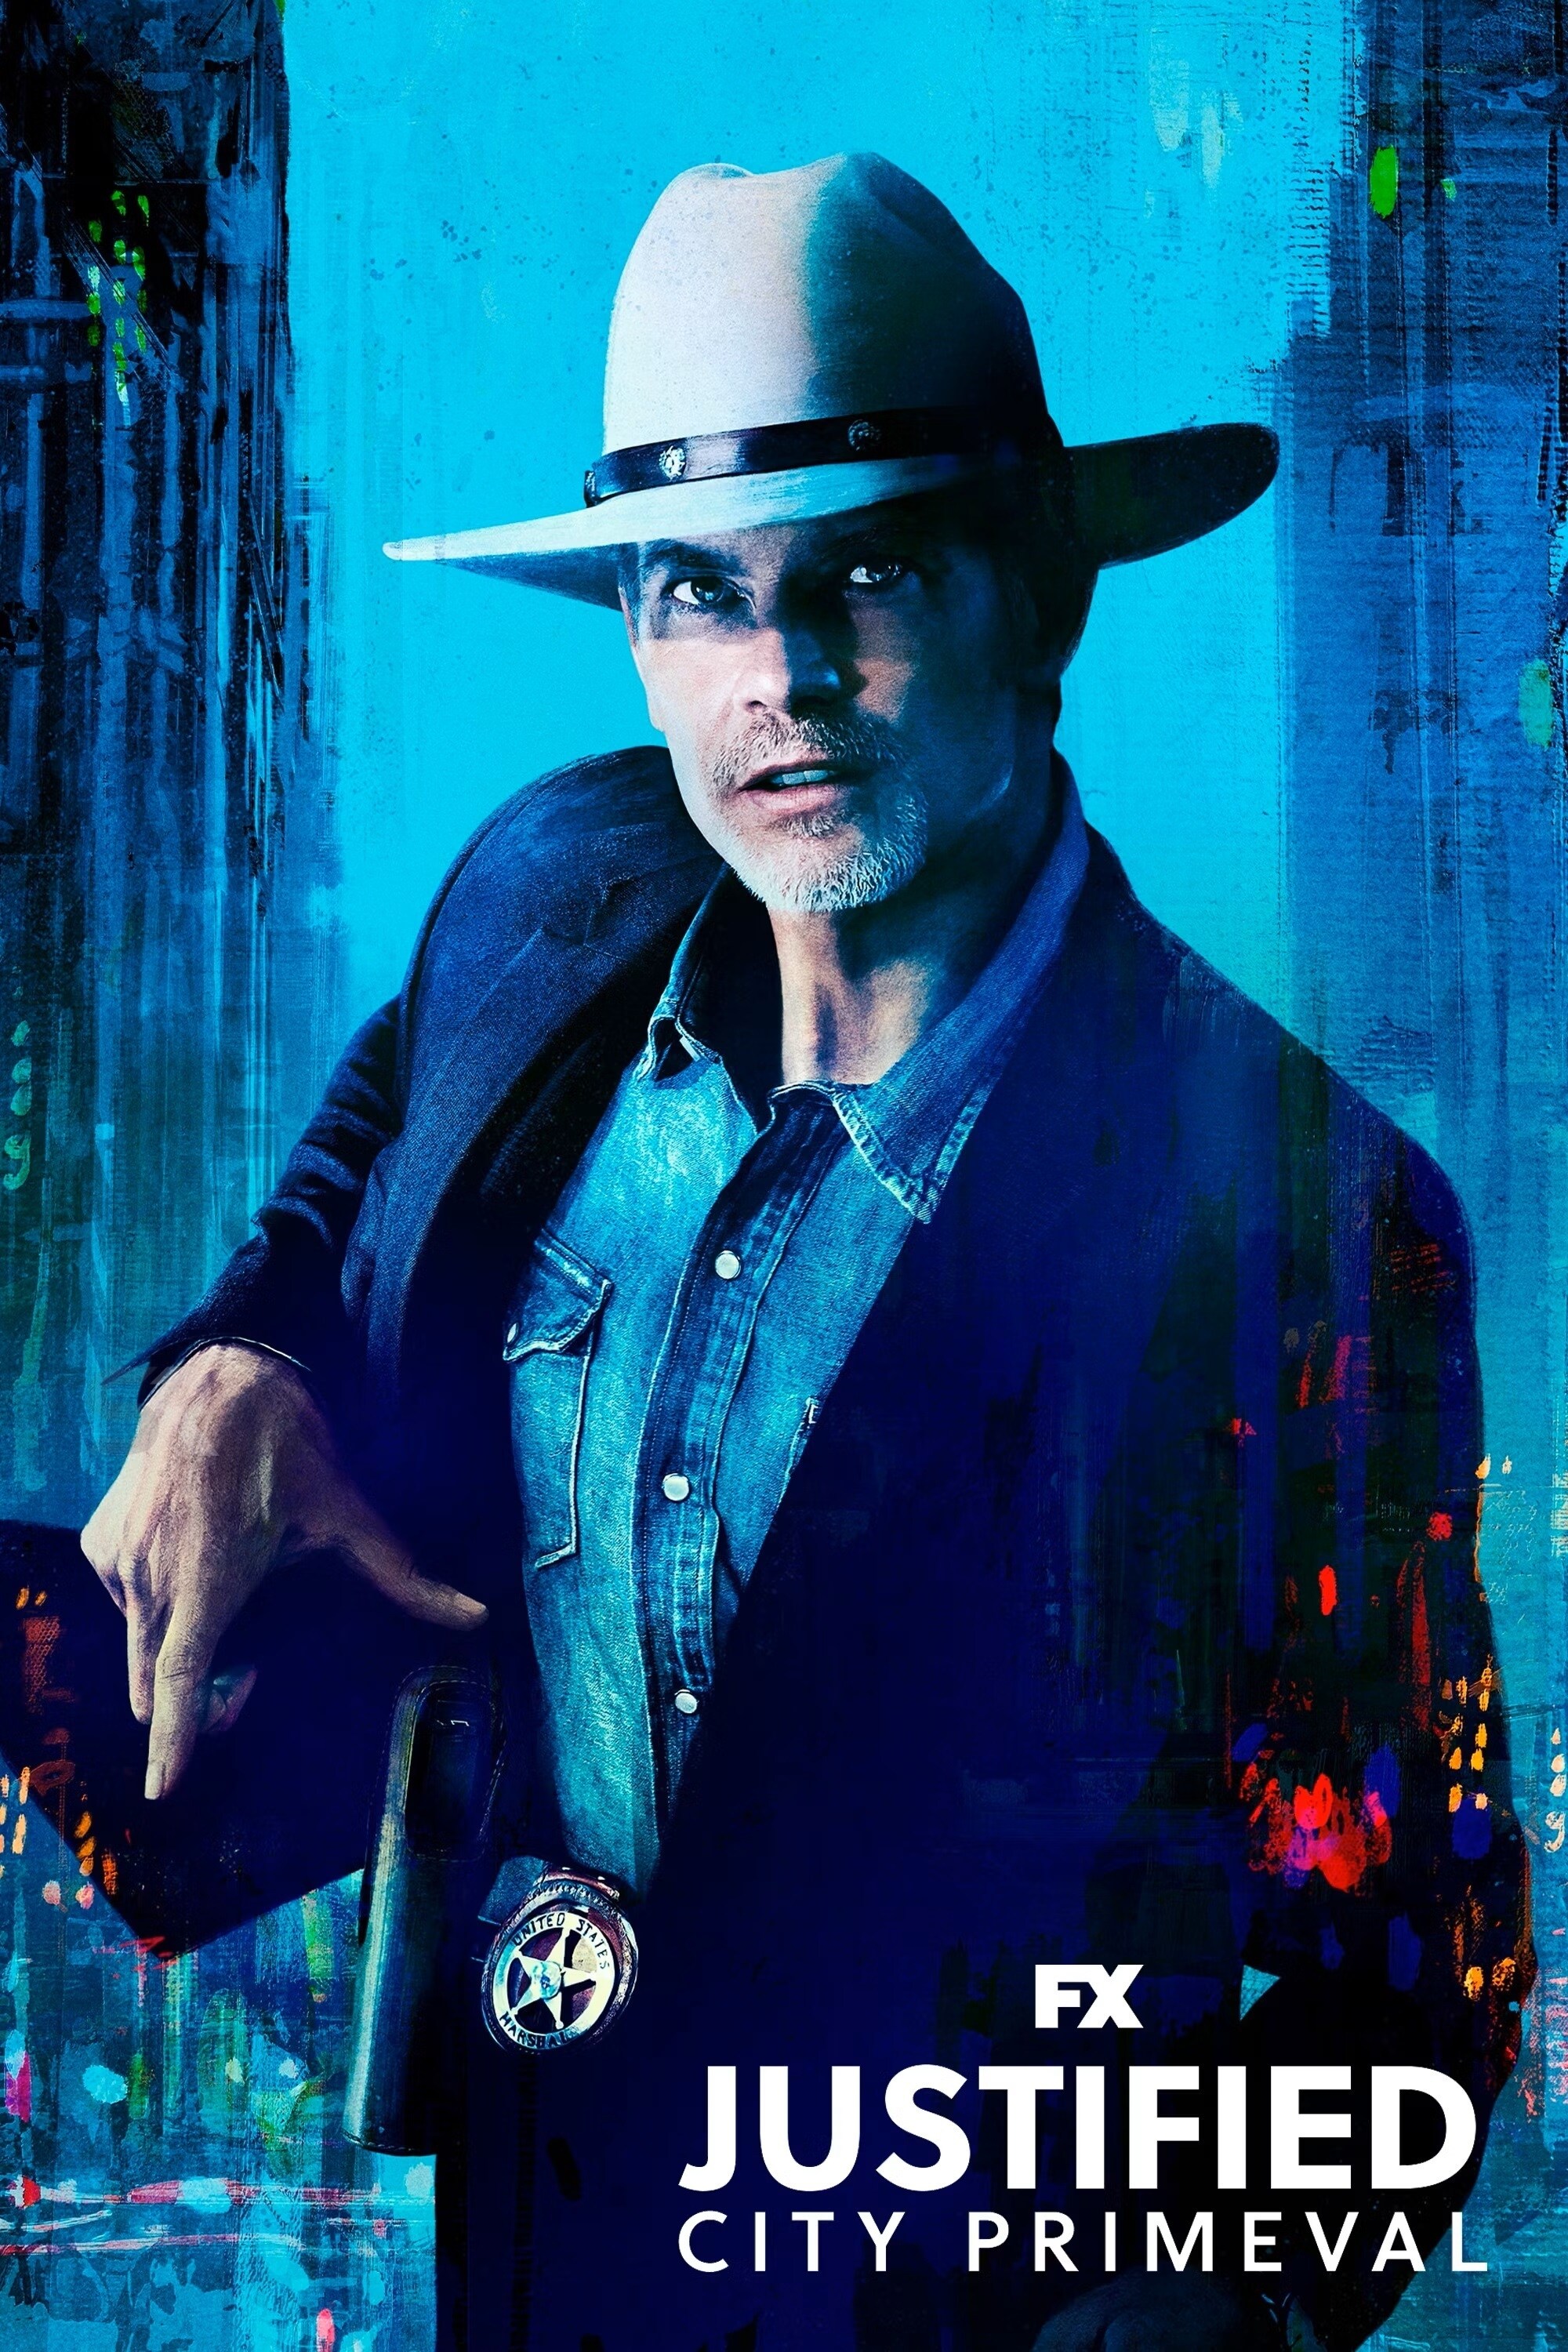 Justified: City Primeval is coming to Disney+